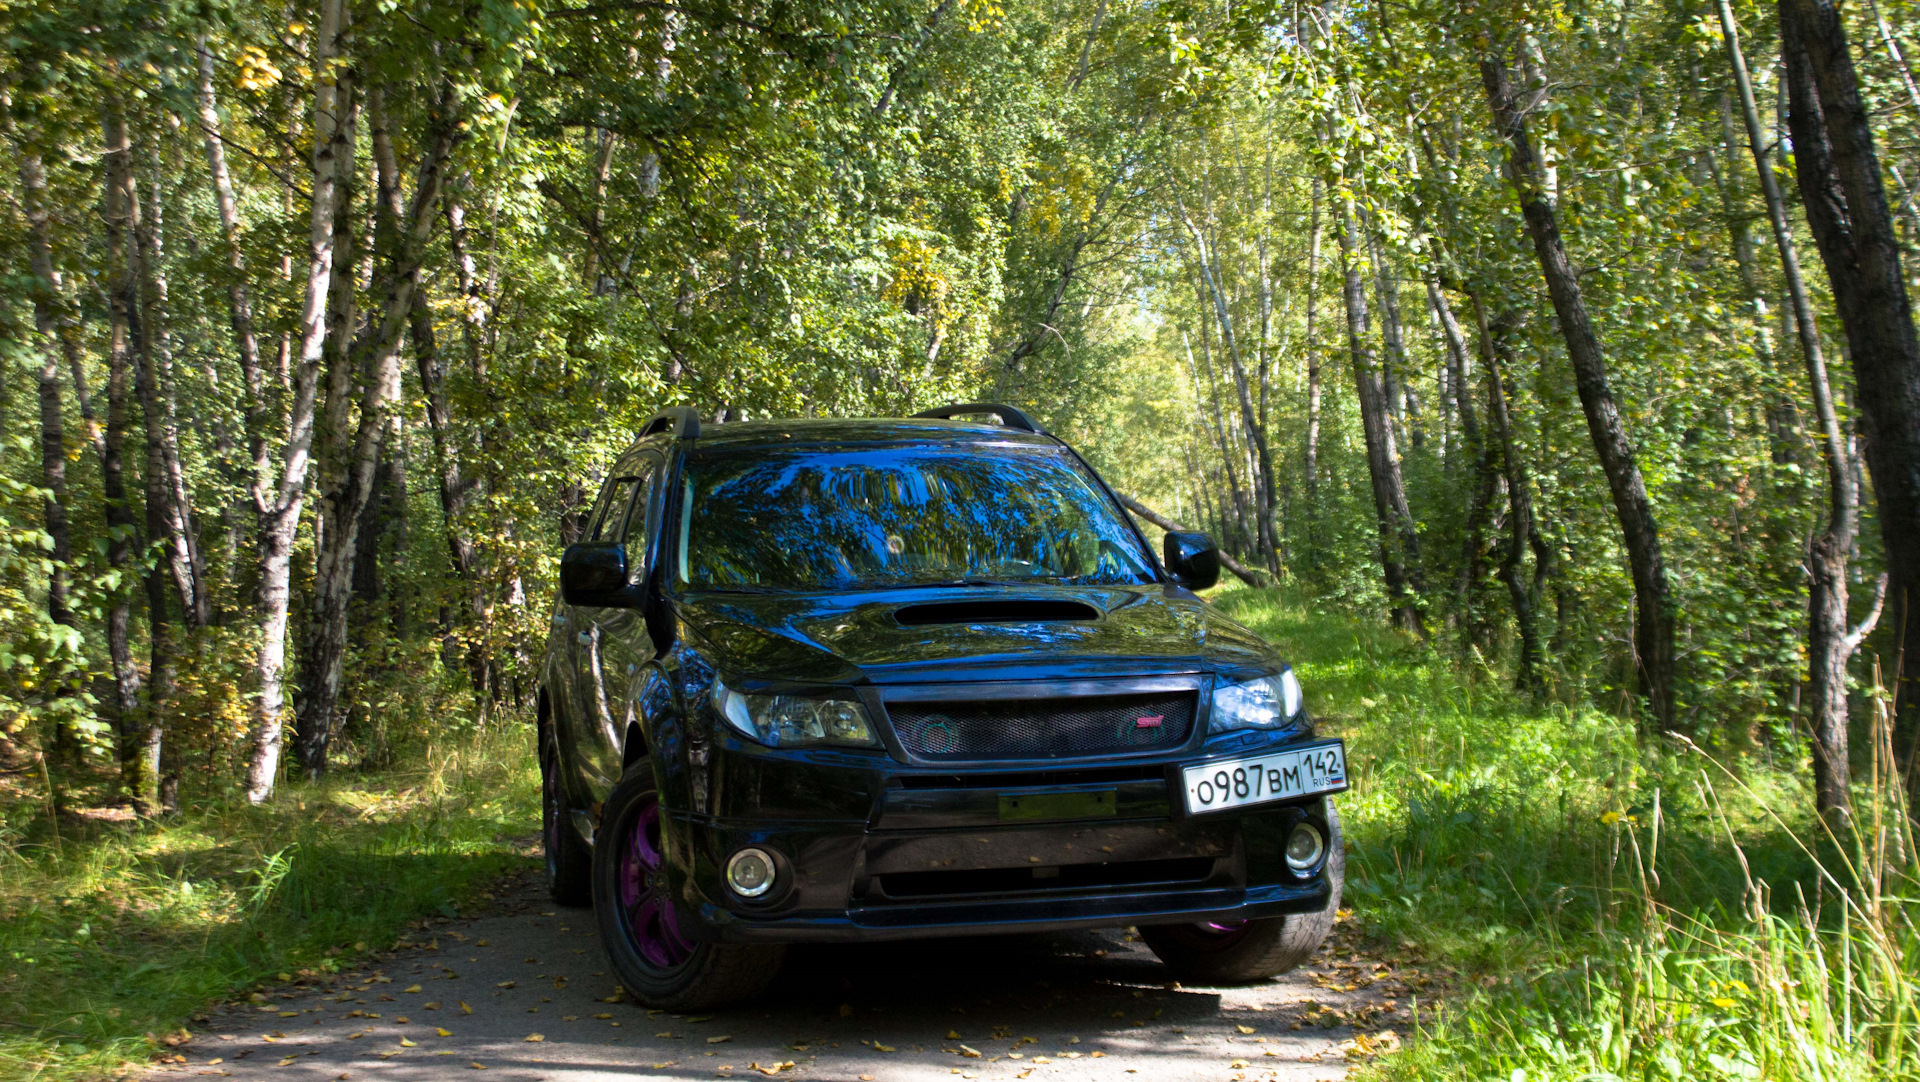 Форестер sh масло. Субару Форестер sh. Форестер sh 5 на бездорожье. Subaru Forester off Road. Forester sh off Road.